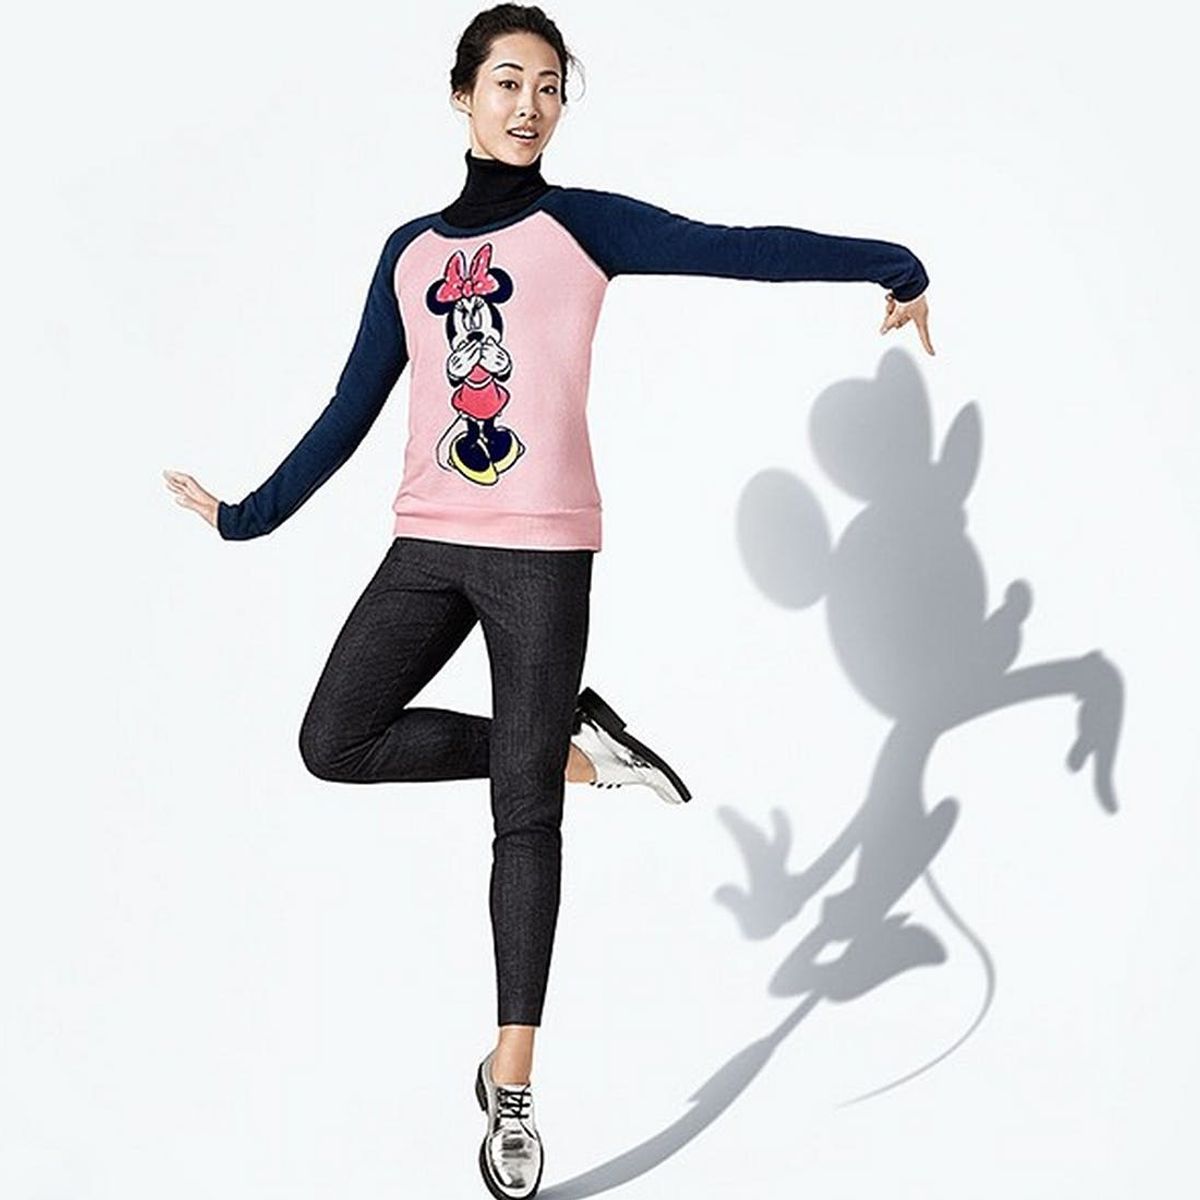 Uniqlo’s Newest Collab Is All About Disney